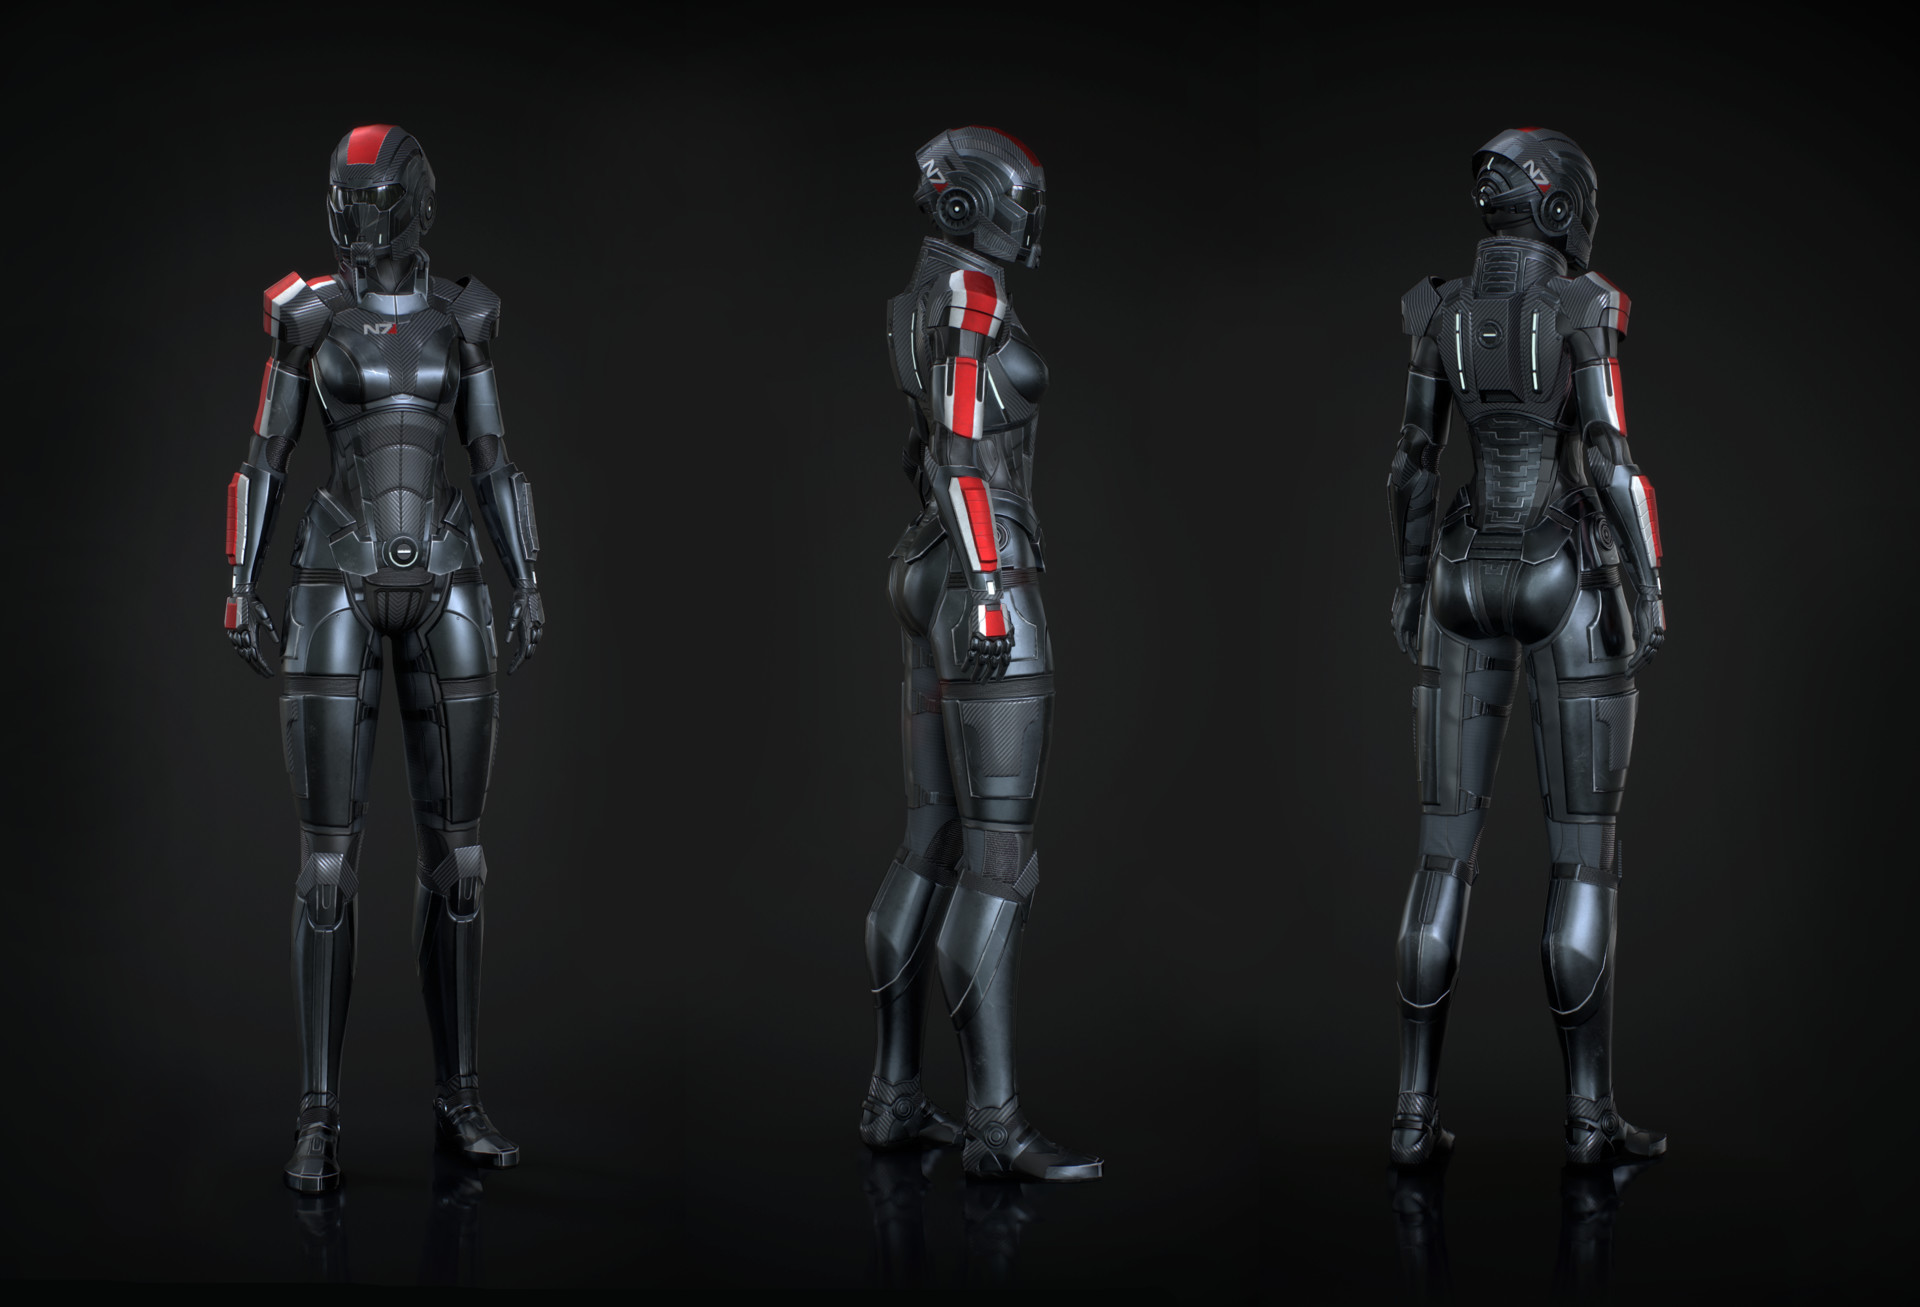 Porr Mass Effect: Andromeda guide: How to get the N7 armor (and why you mig...